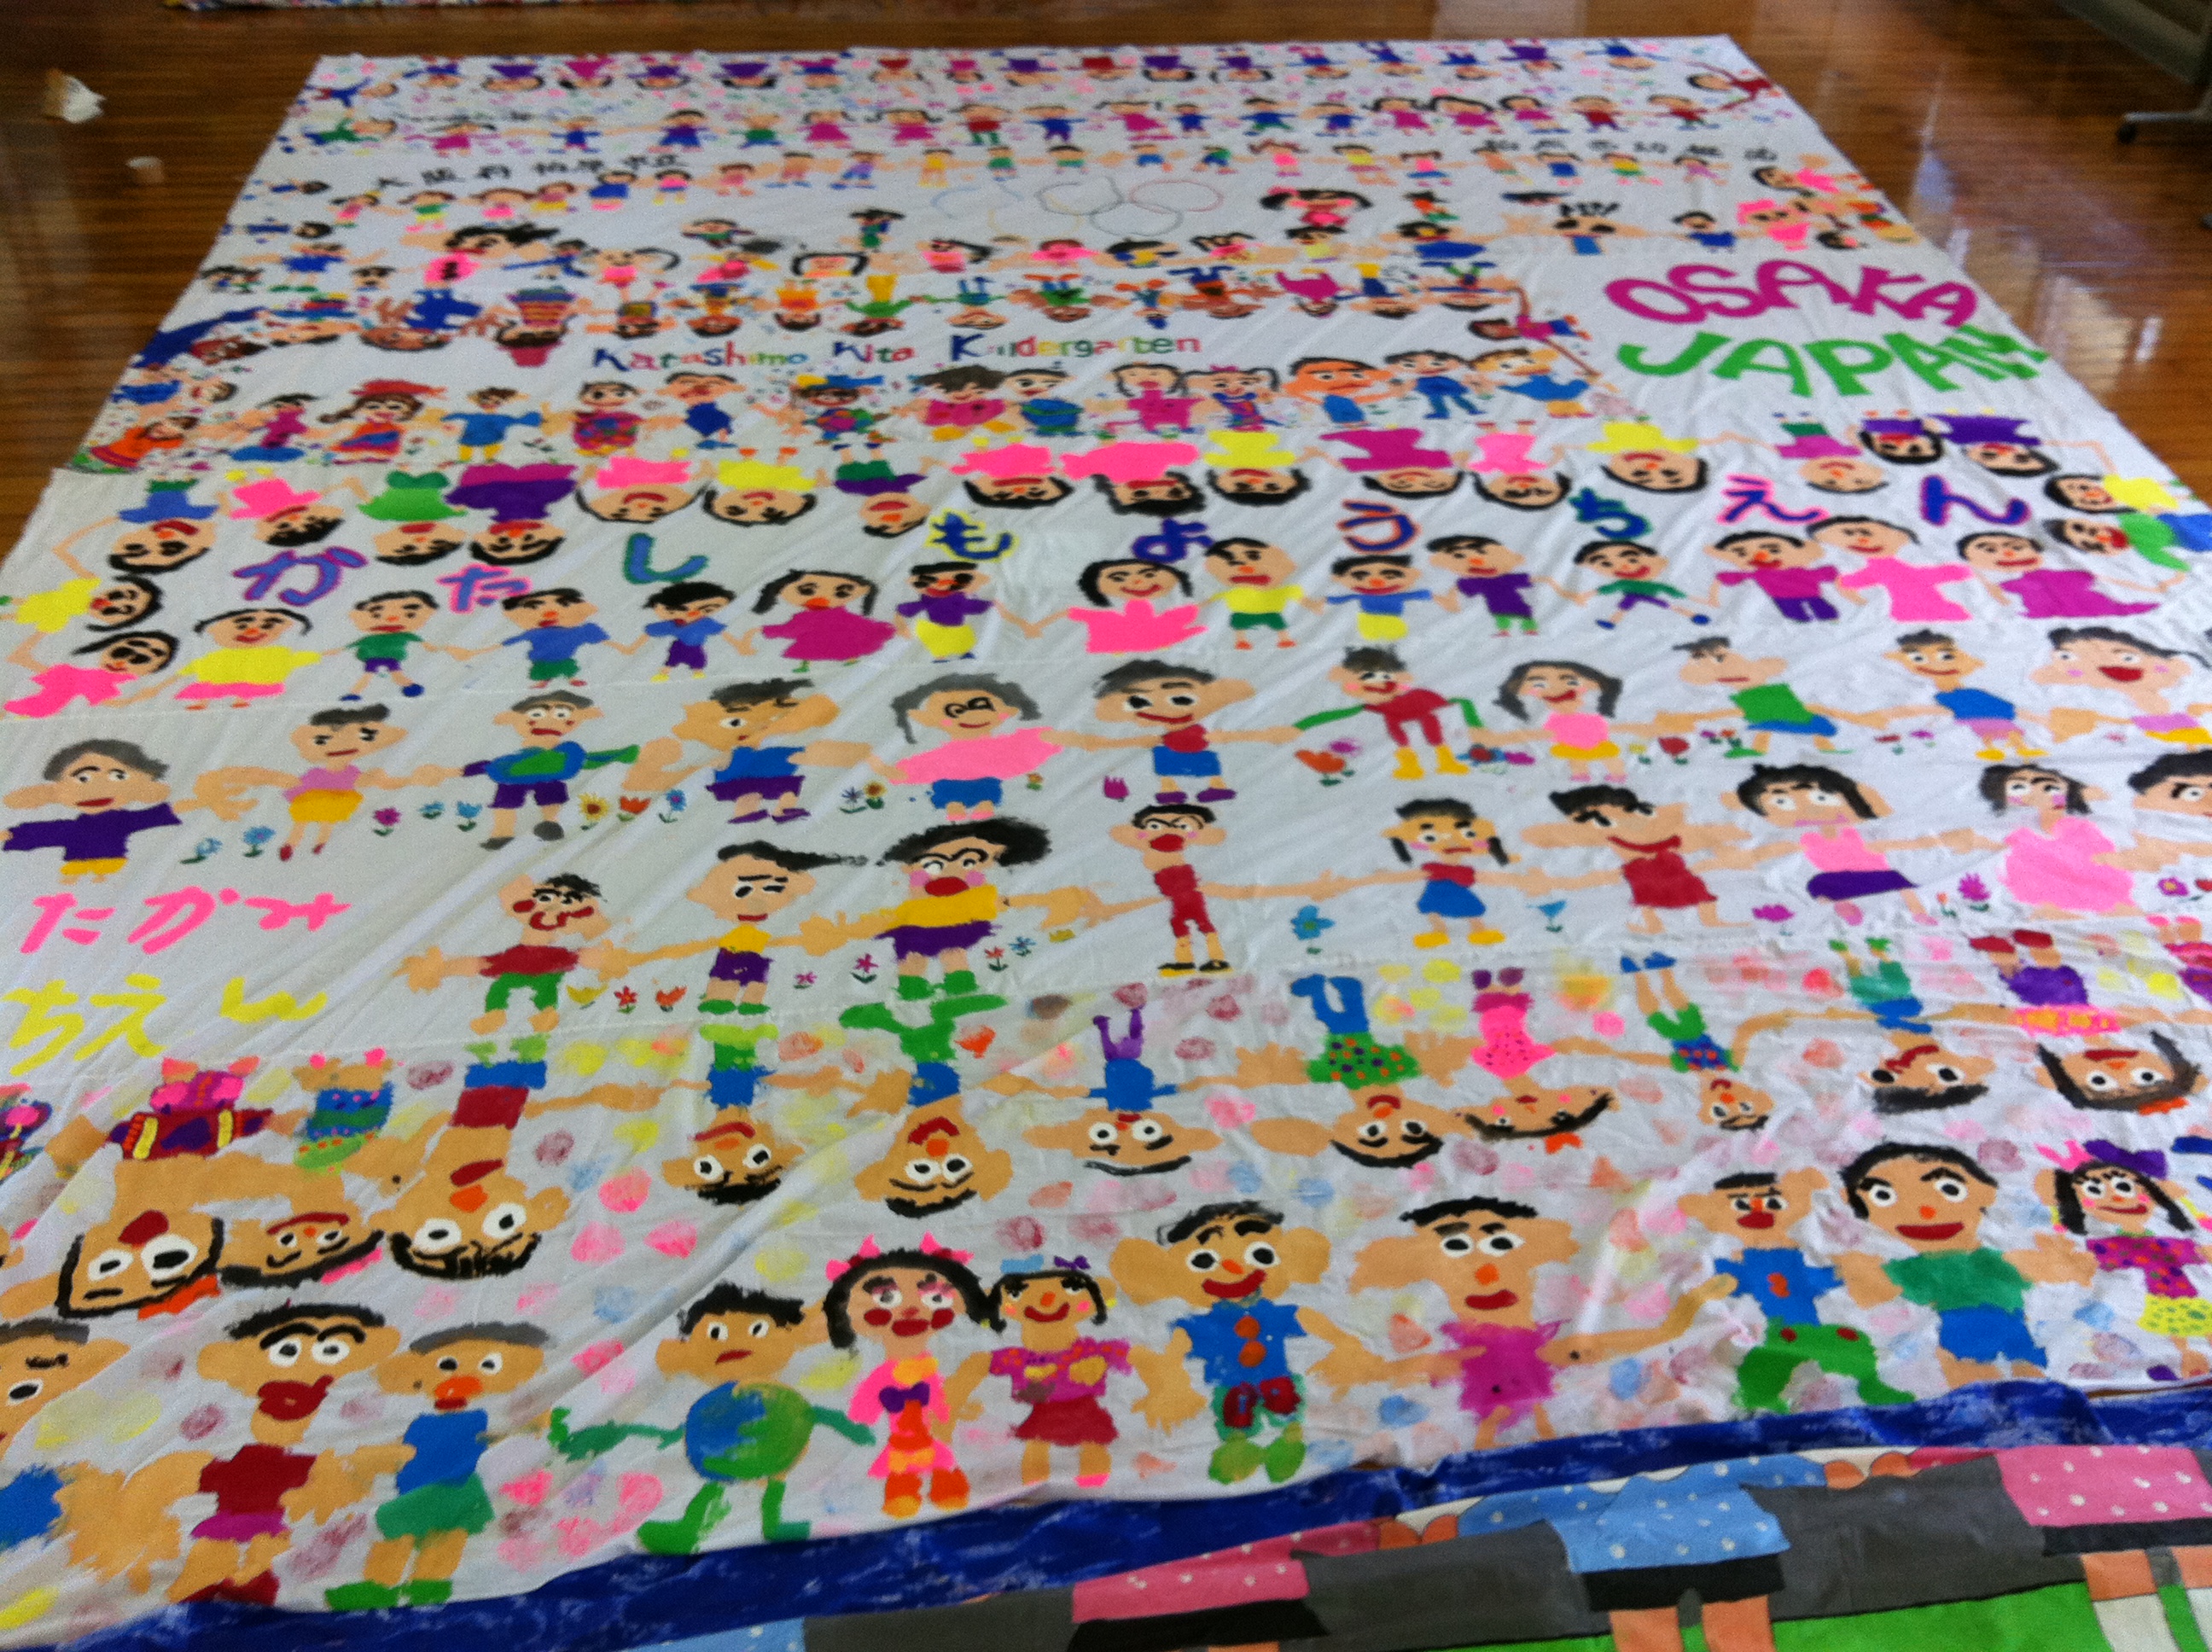 Created “The Biggest Painting in the World 2012  Paintings from Every Prefecture in Japan, in Kashiwara city”.